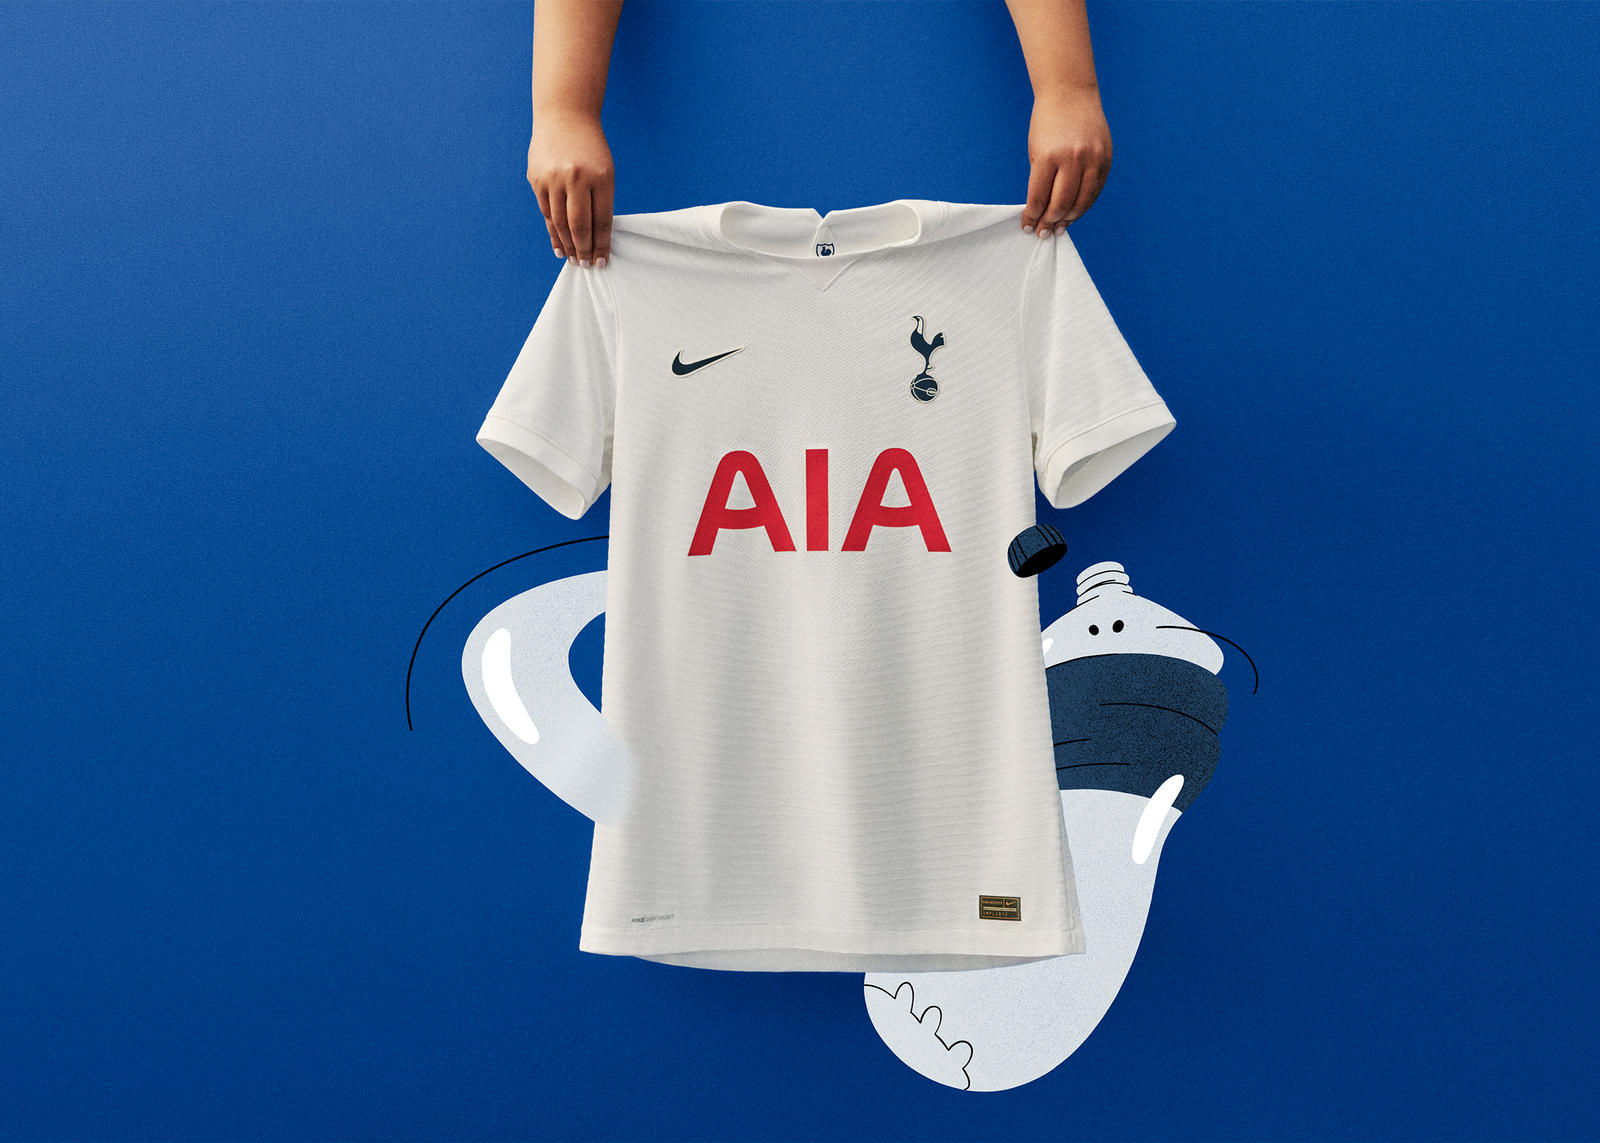 New FC 24 Prime Gaming pack gives out a free Tottenham Hotspur star